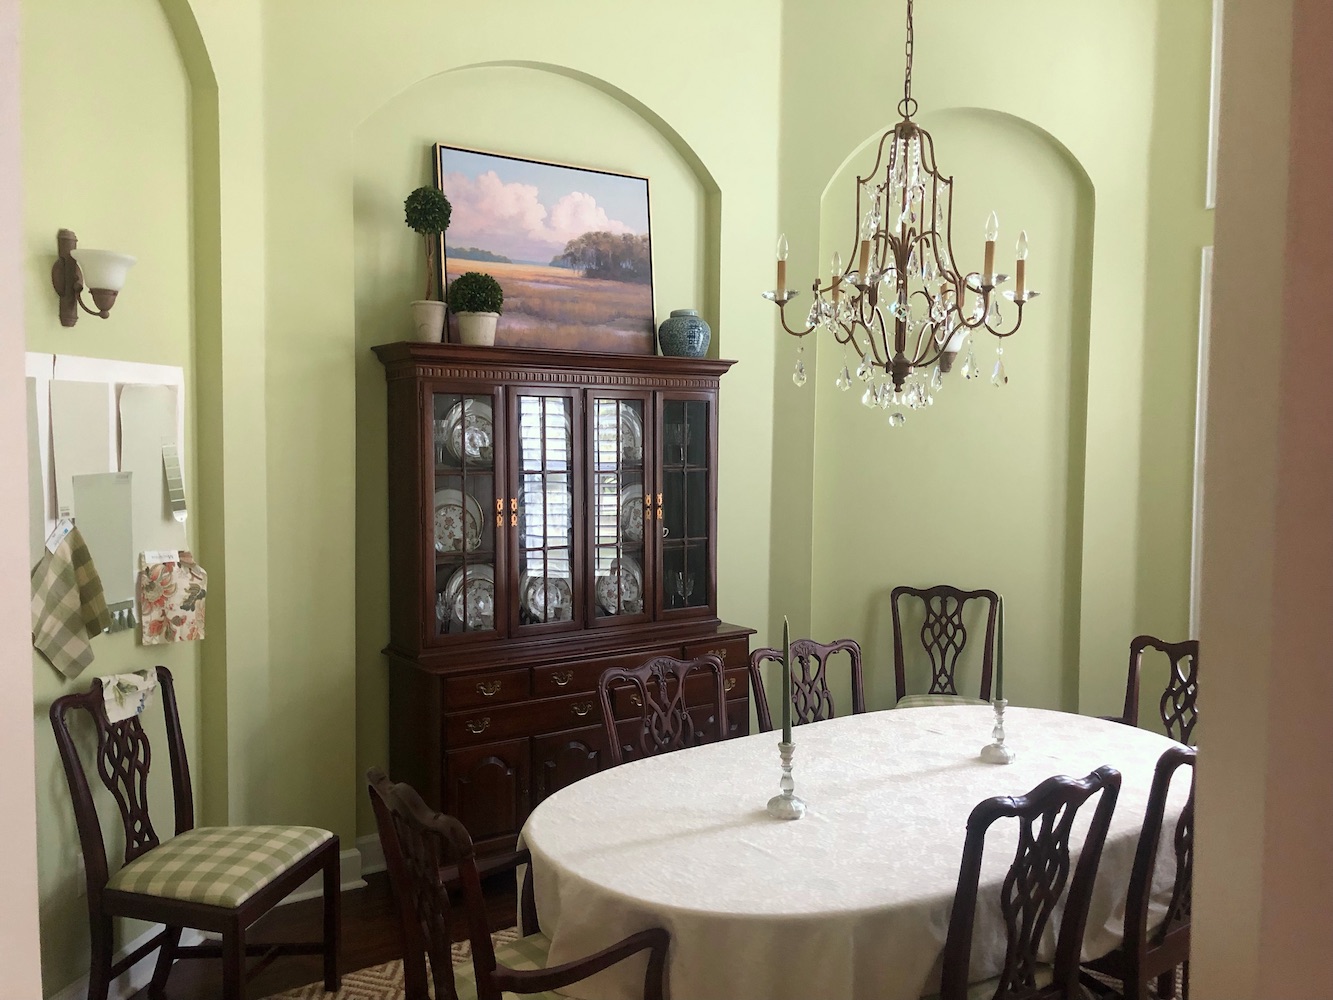 niches galore - architectural mistakes - dining room